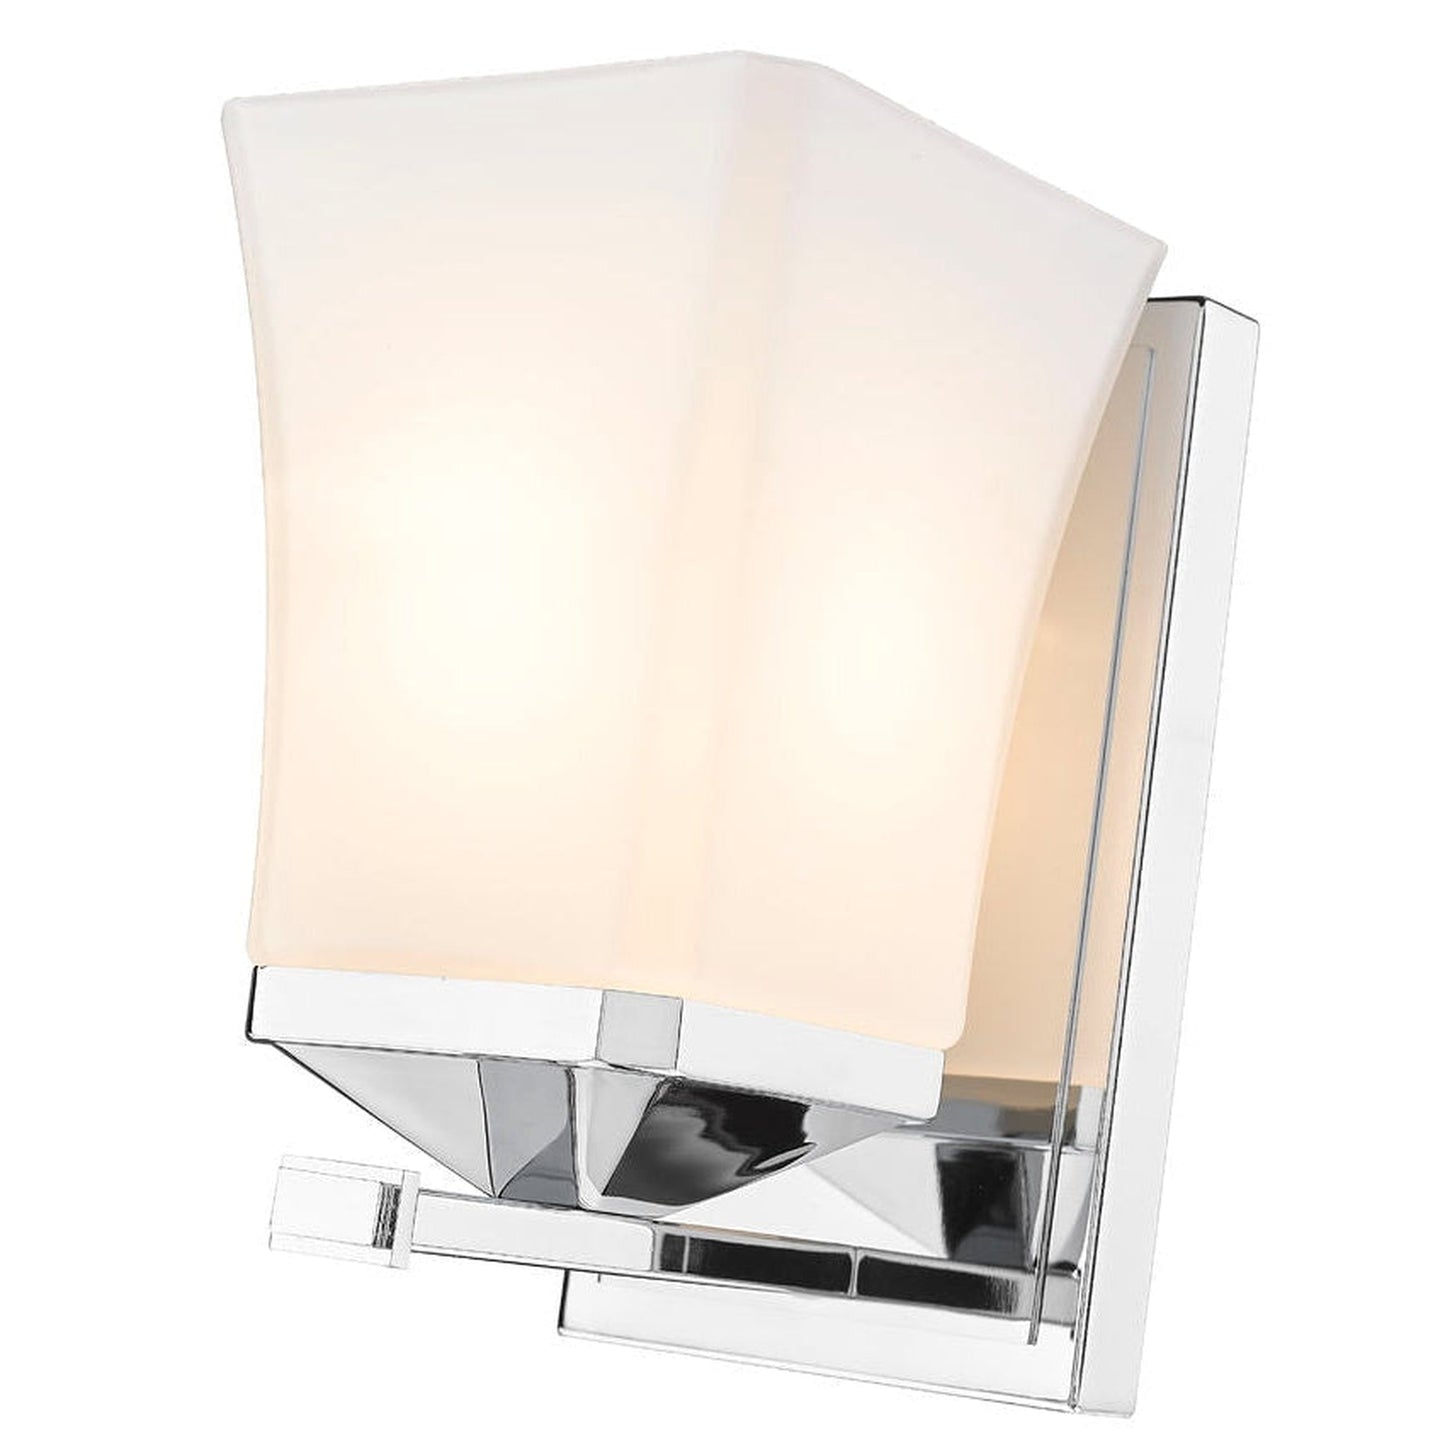 Z-Lite Darcy 5" 1-Light Chrome Wall Sconce With Etched Opal Glass Shade